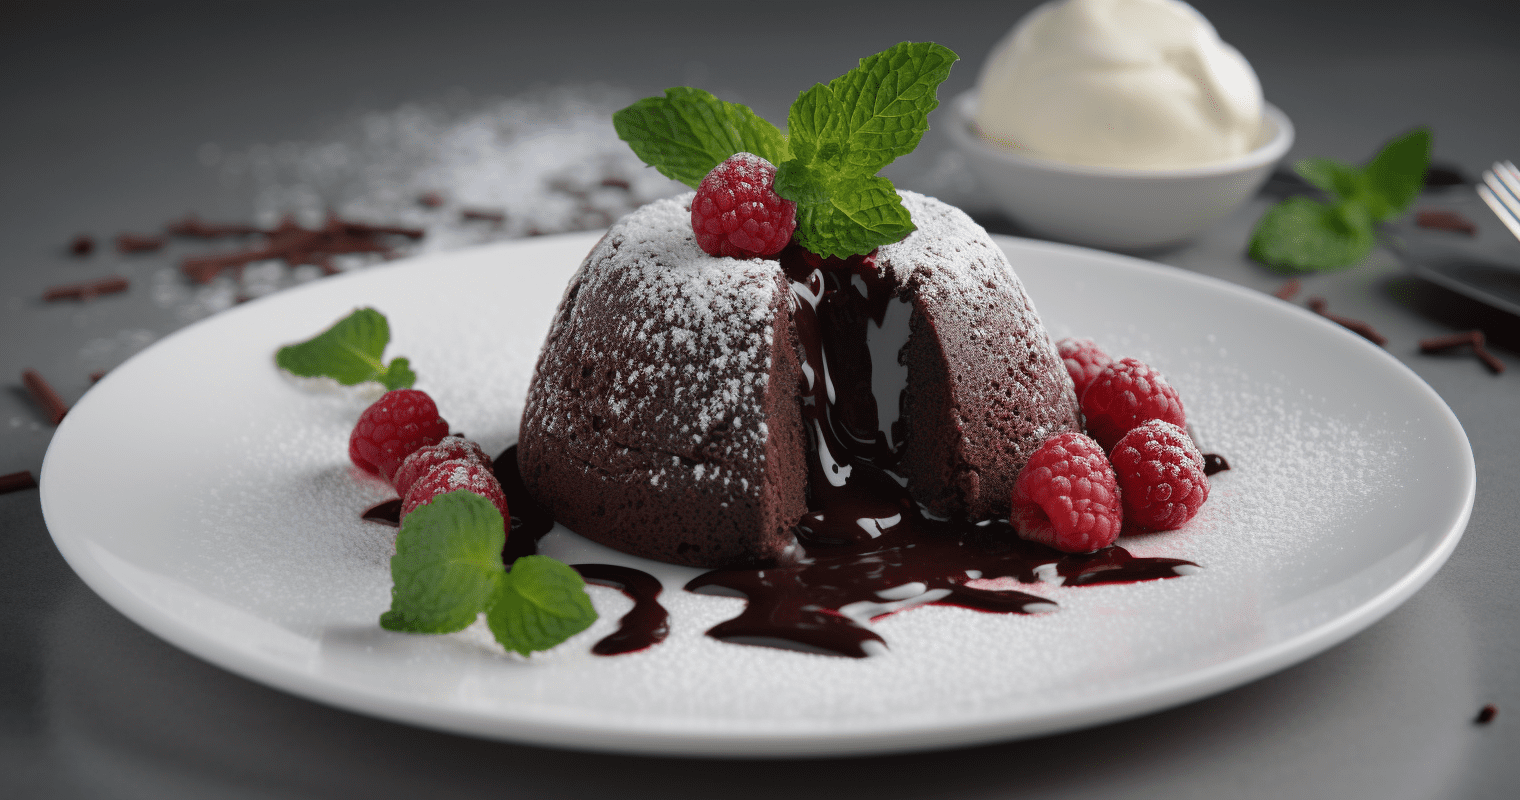 Indulge in the Richness of Chocolate with This Decadent Chocolate Lava Cake Recipe